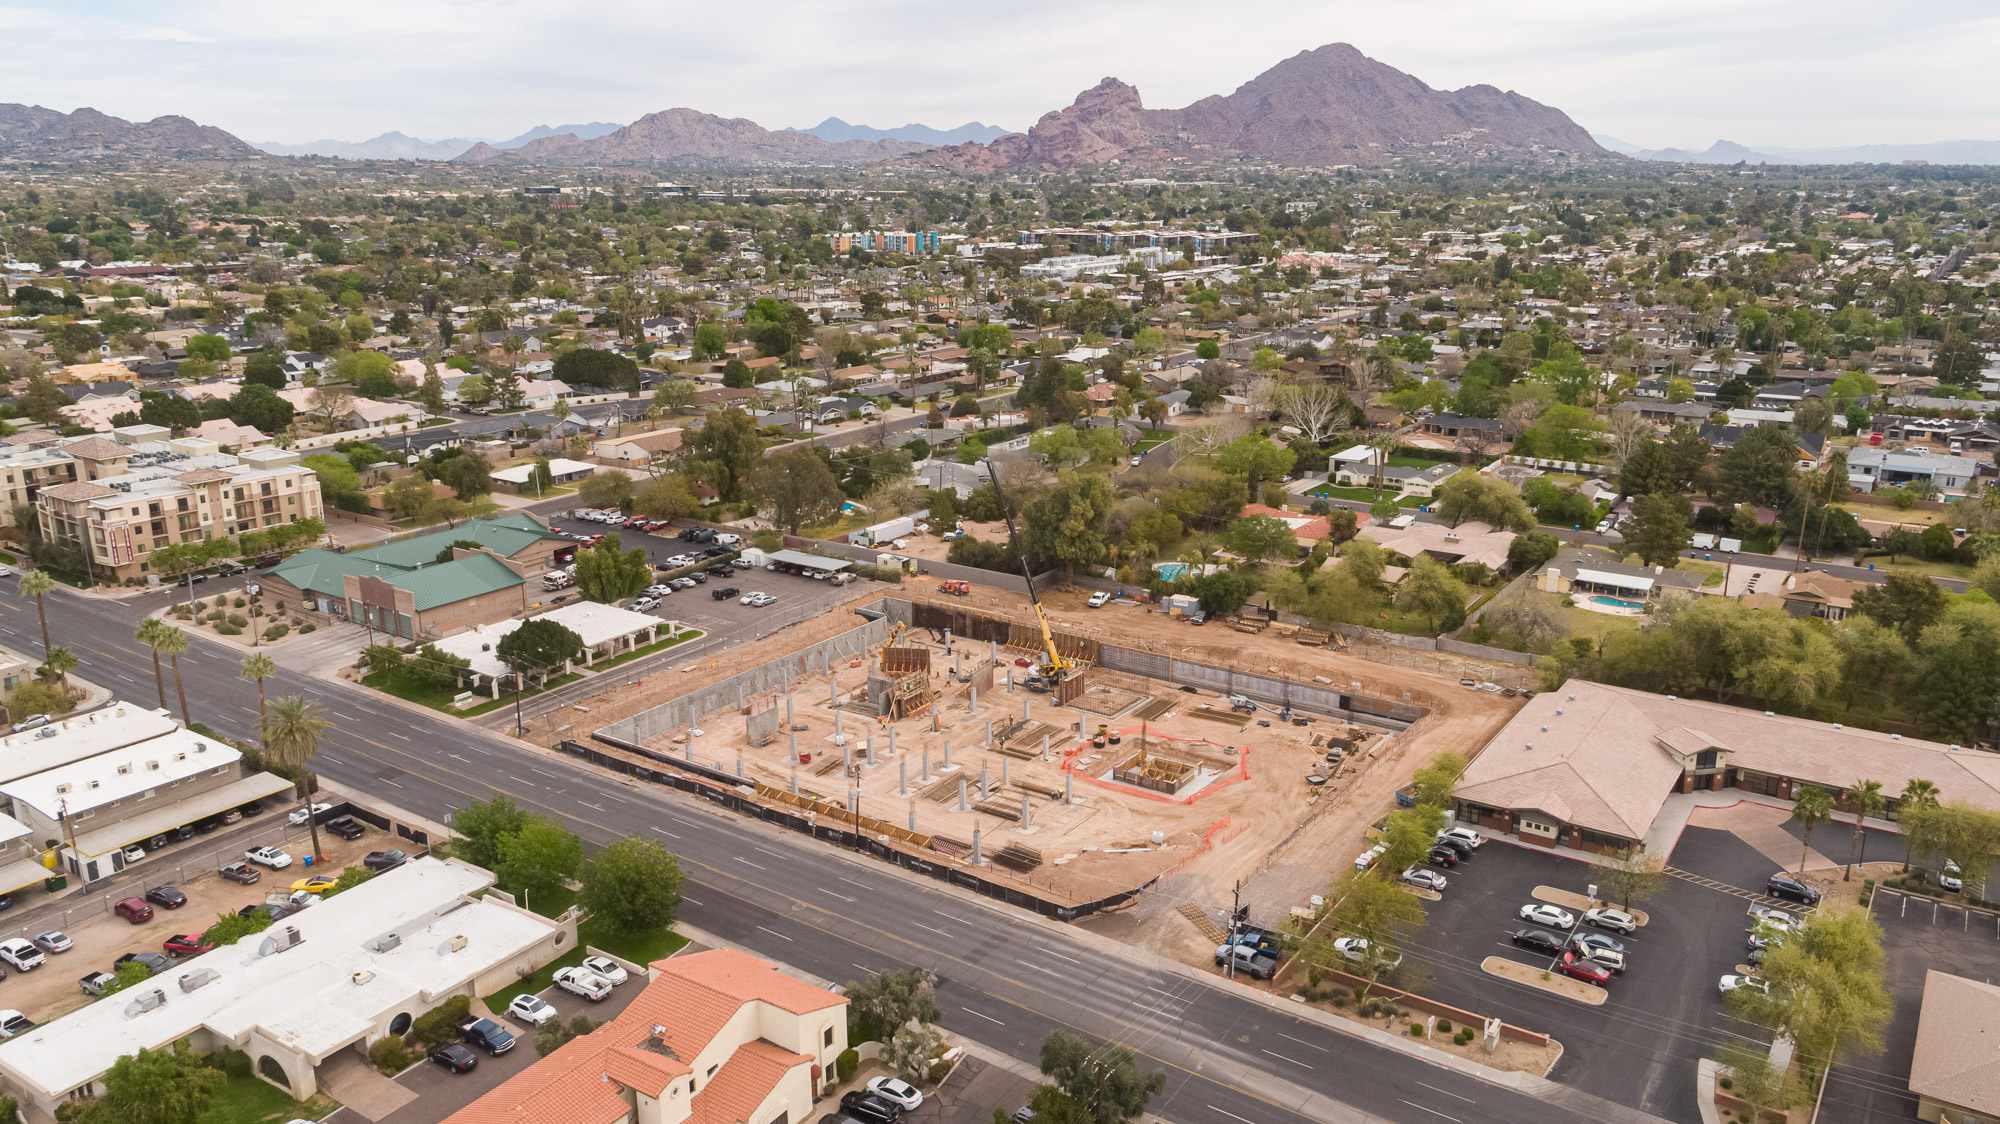 An aerial view of a construction site in Scottsdale, Arizona near The Common.